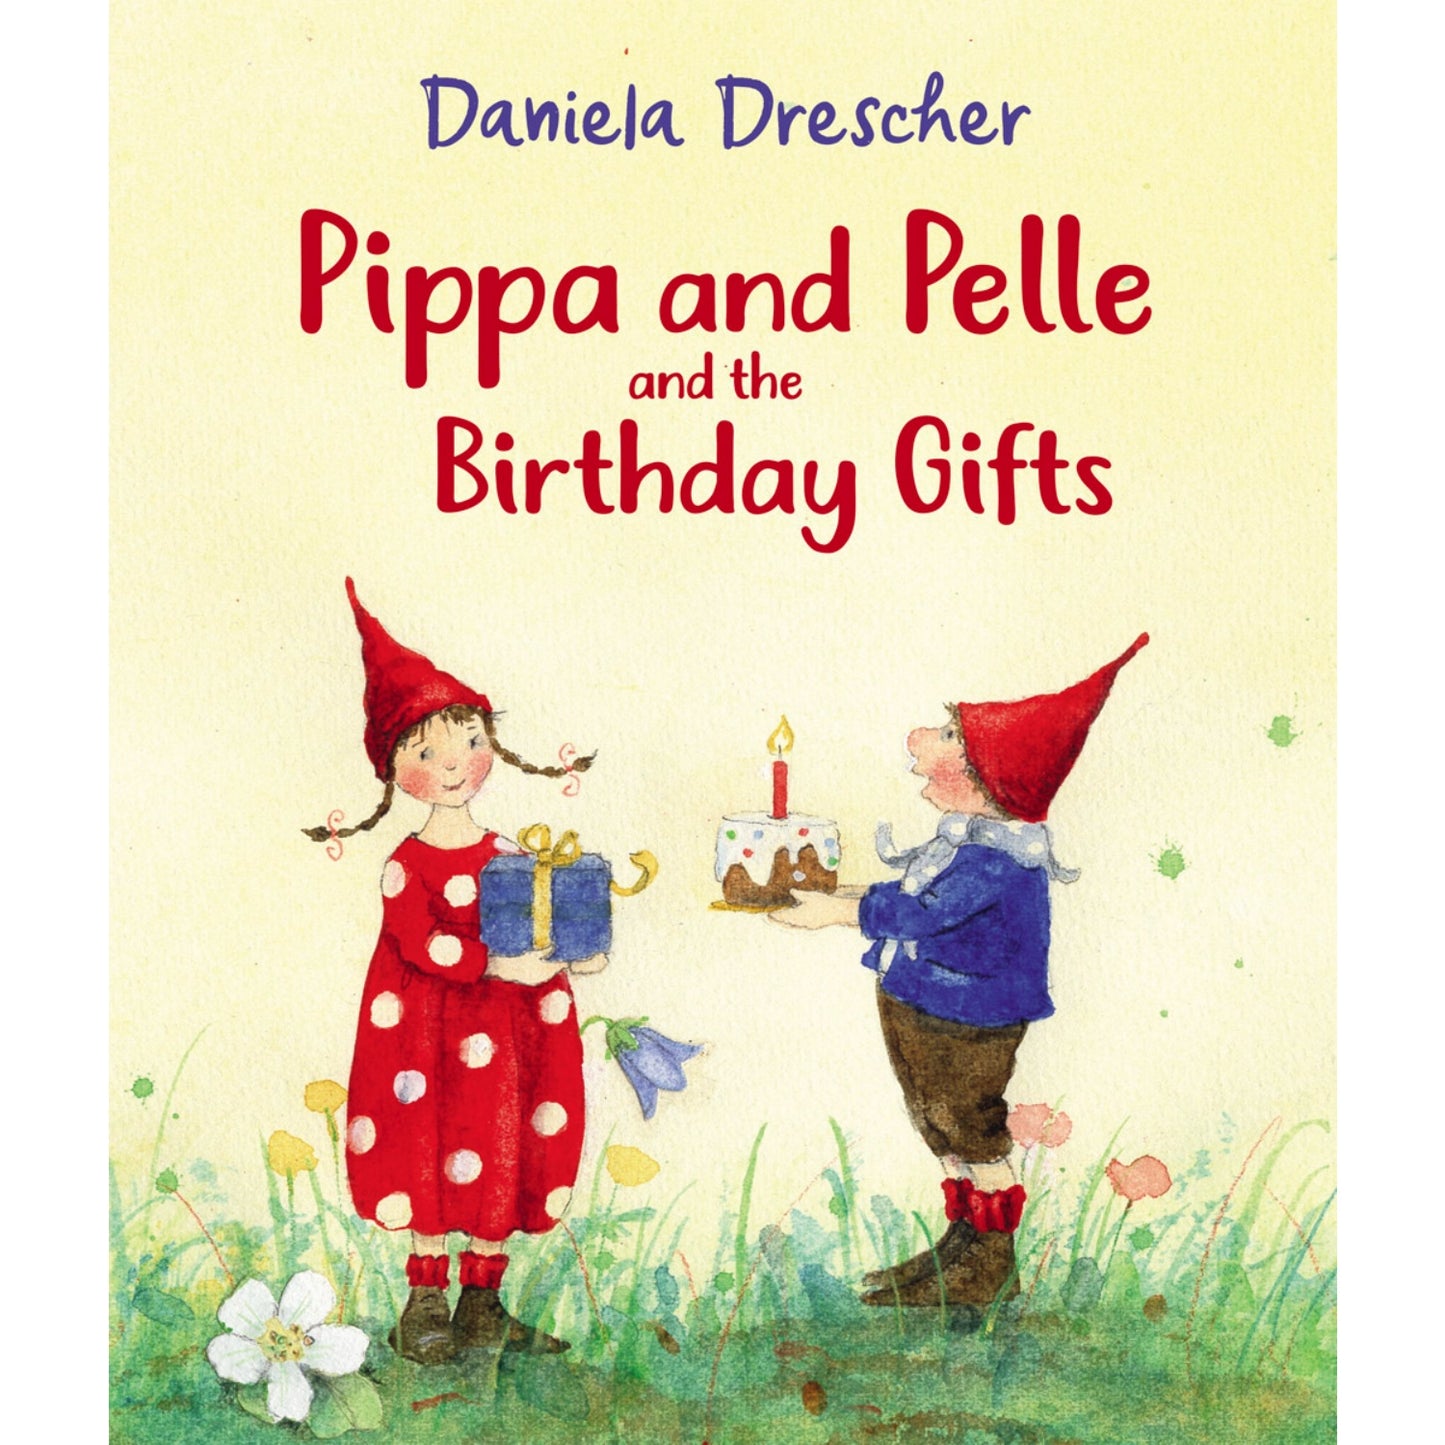 Pippa and Pelle and the Birthday Gifts | Daniela Drescher | Board Book | Children’s Book on Seasons